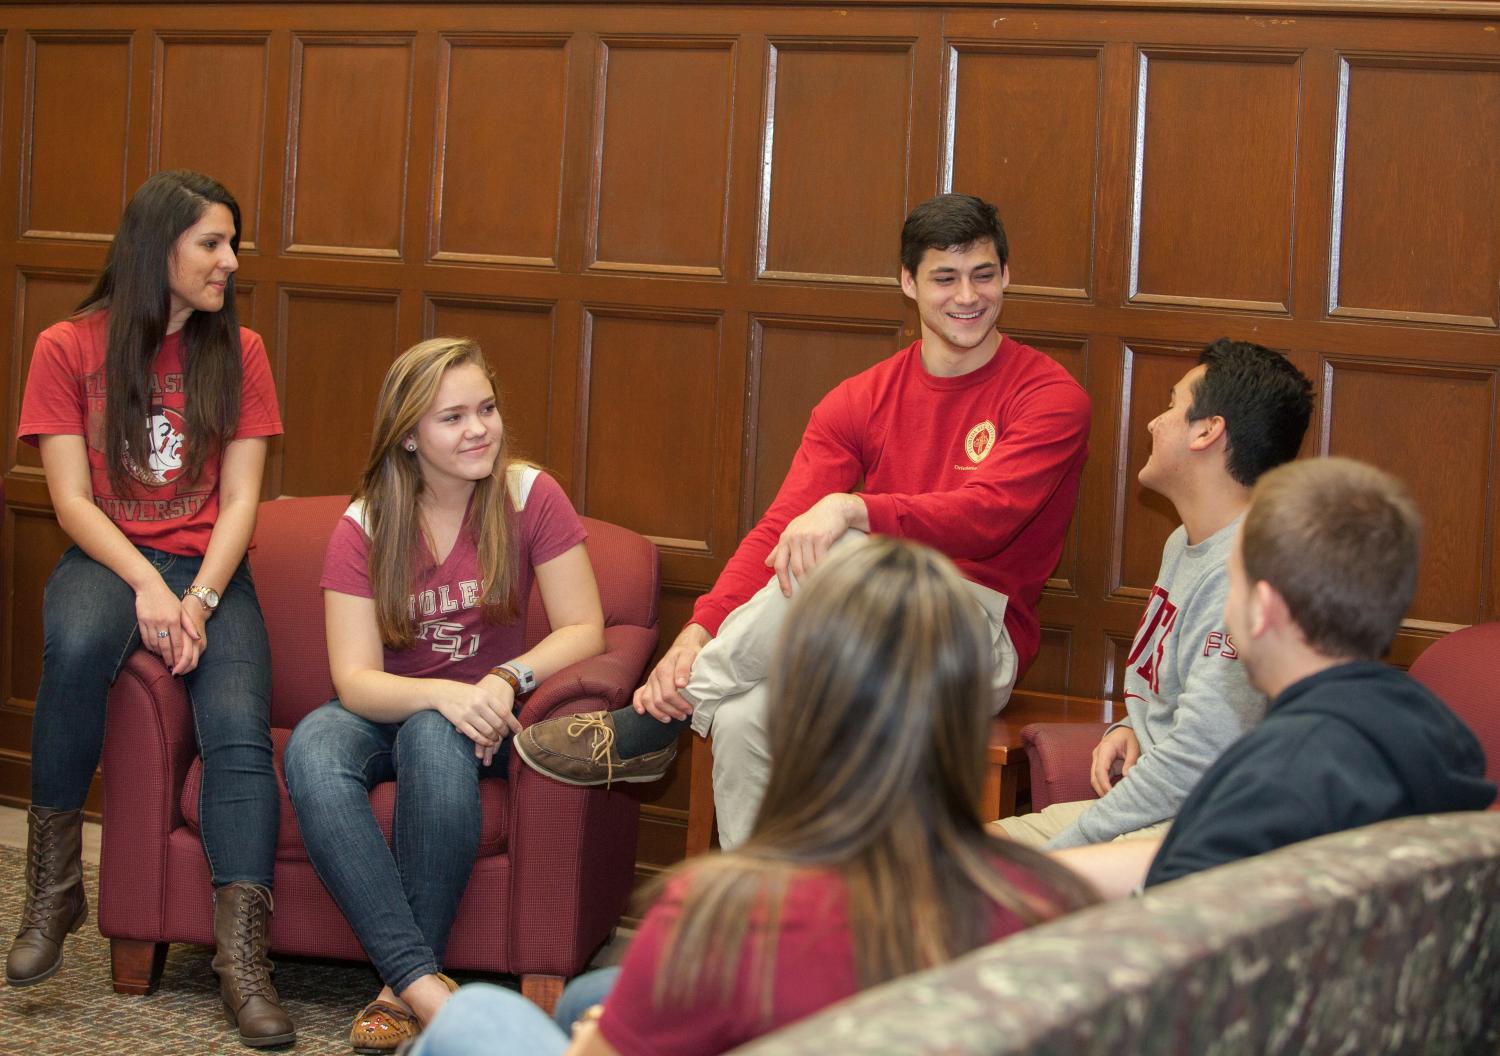 "A group of six students sitting on garnet armchairs smiling and talking amongst themselves"